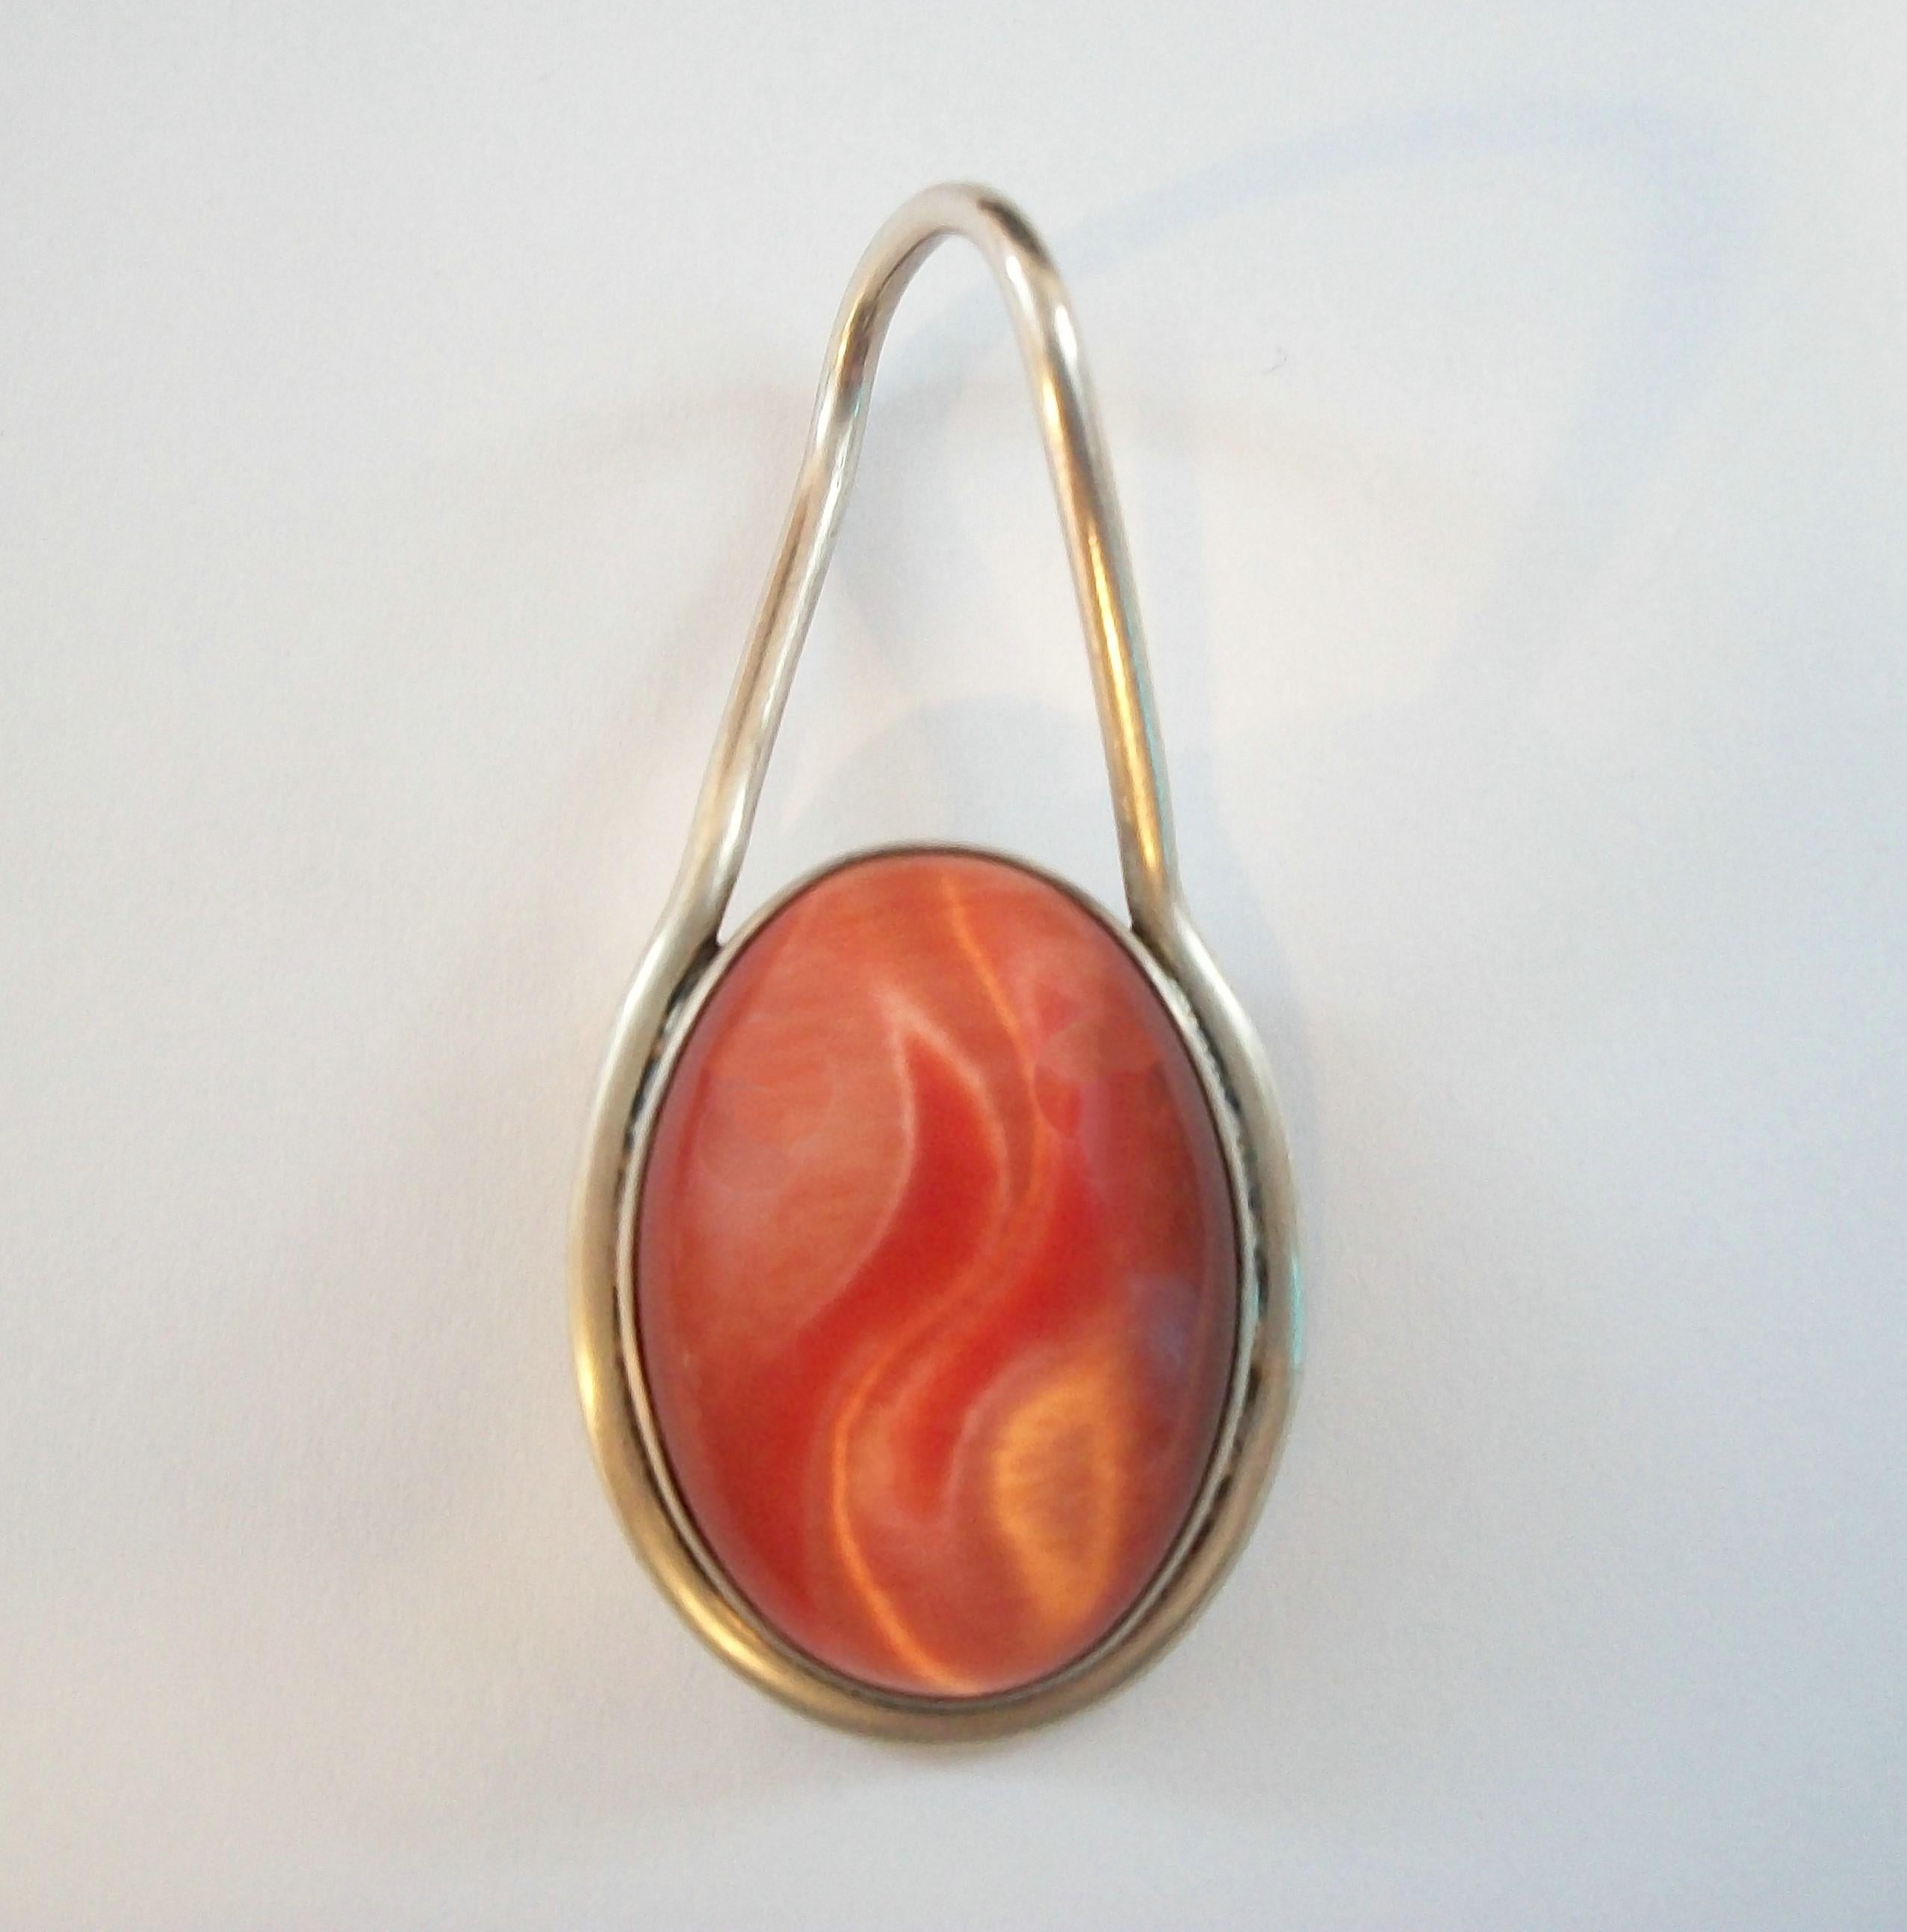 Modernist Orange Glass & Sterling Silver Pendant - Mexico - Late 20th Century For Sale 3